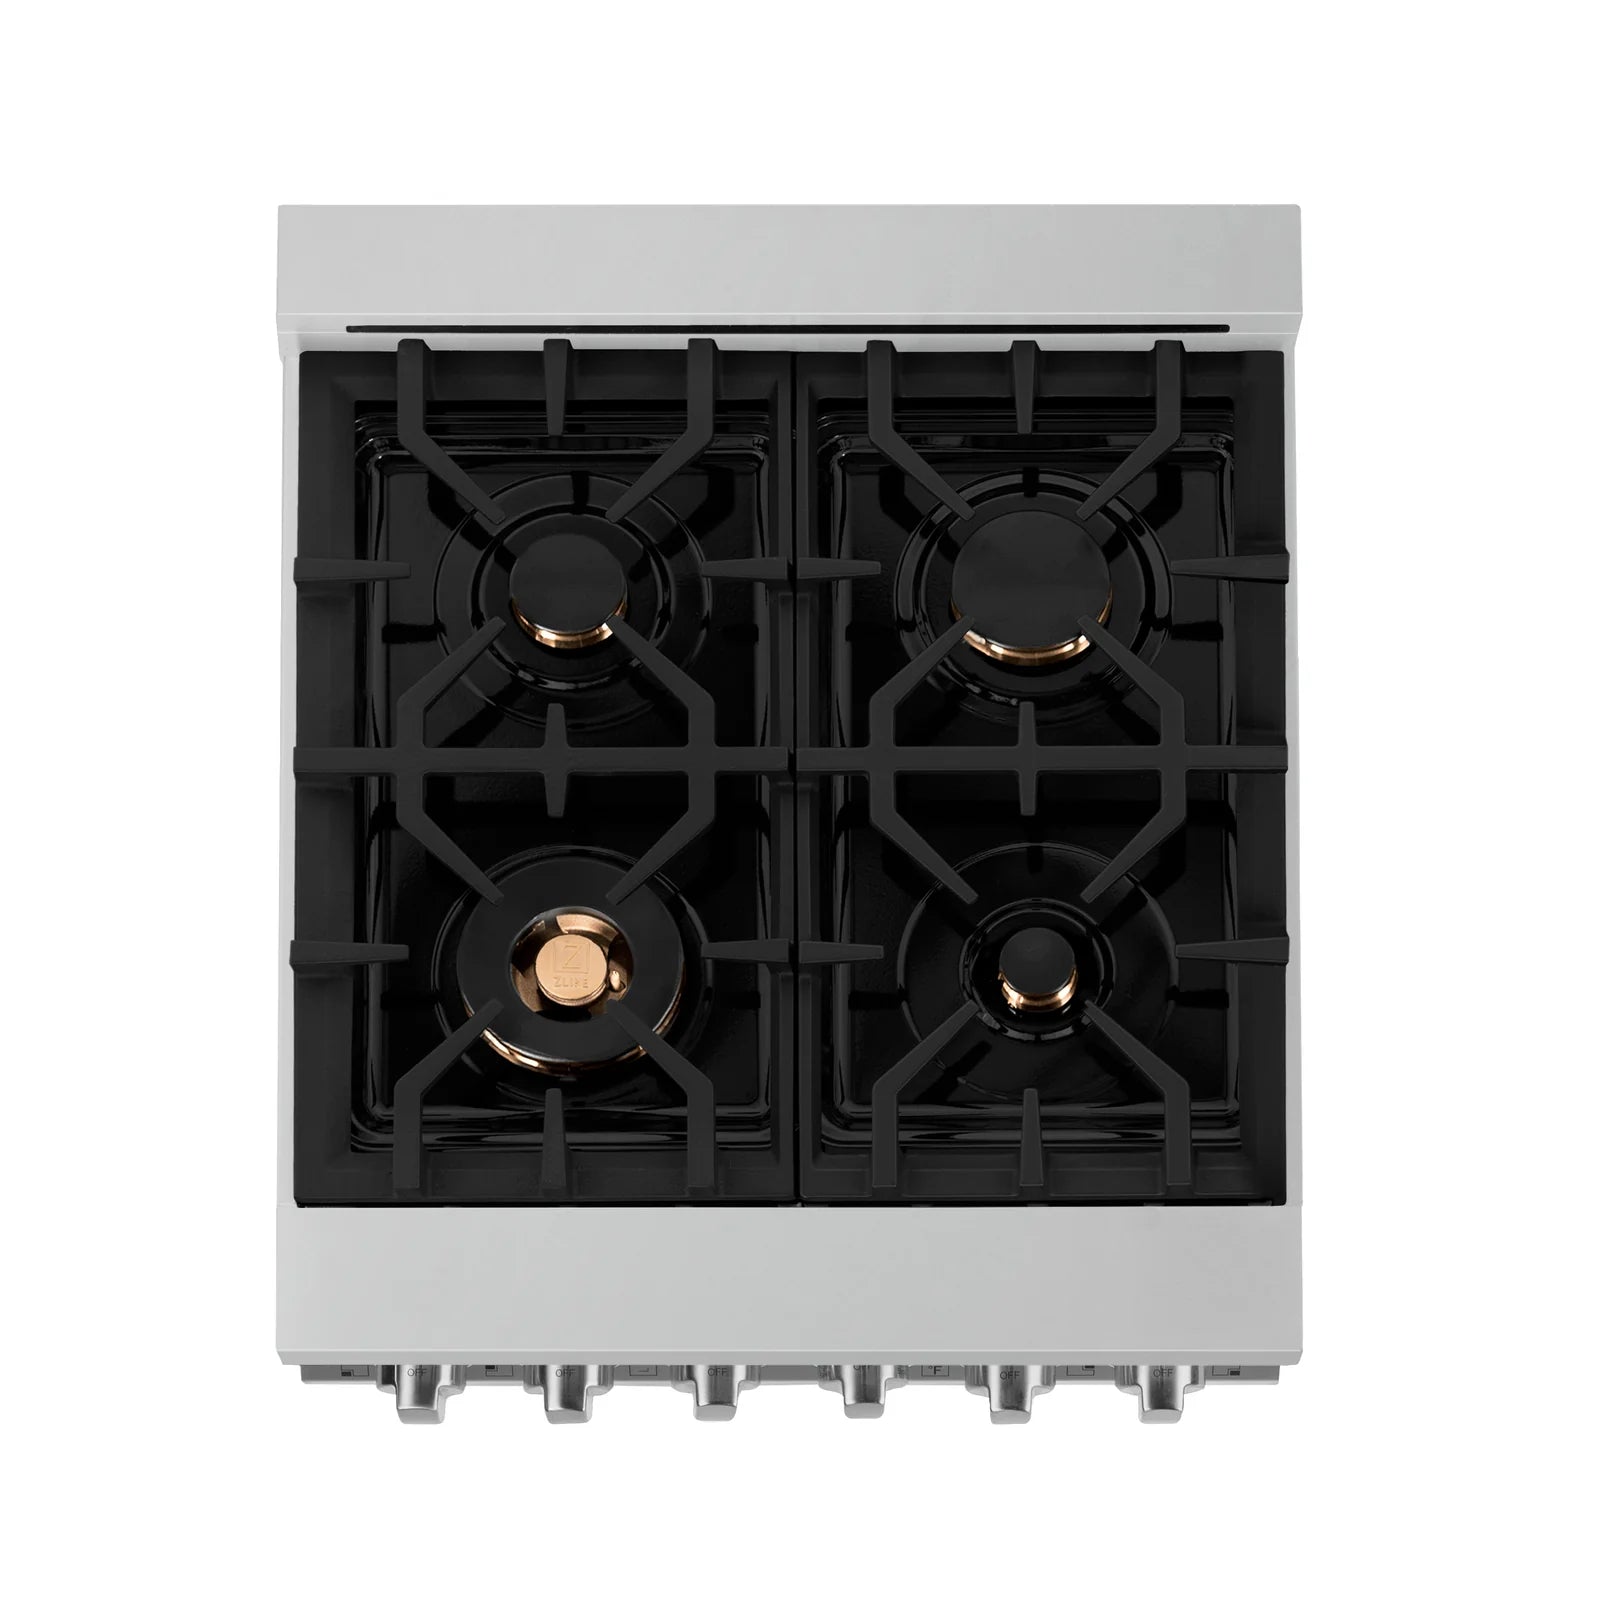 ZLINE 24-Inch Gas Range with 2.8 cu. ft. Gas Oven and Gas Cooktop with Griddle and Brass Burners in Stainless Steel - RG-BR-GR-24